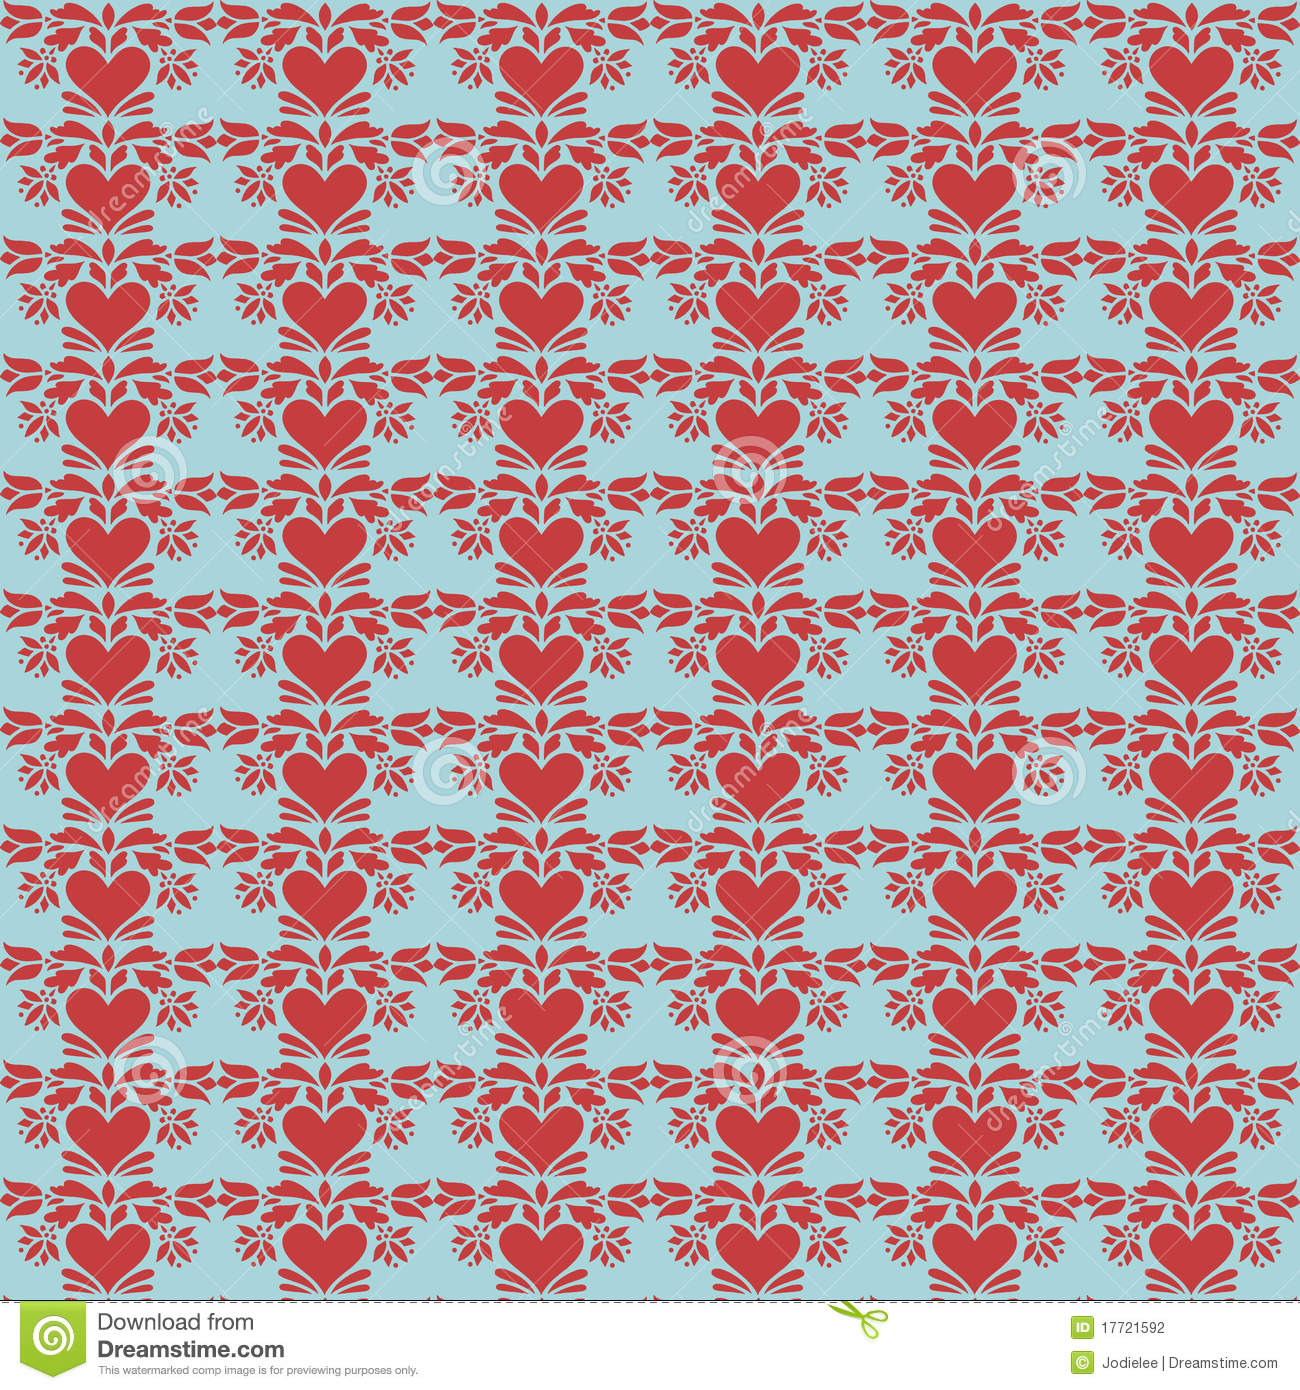 Image Folk Art Heart Pattern Pc Android iPhone And iPad Wallpaper